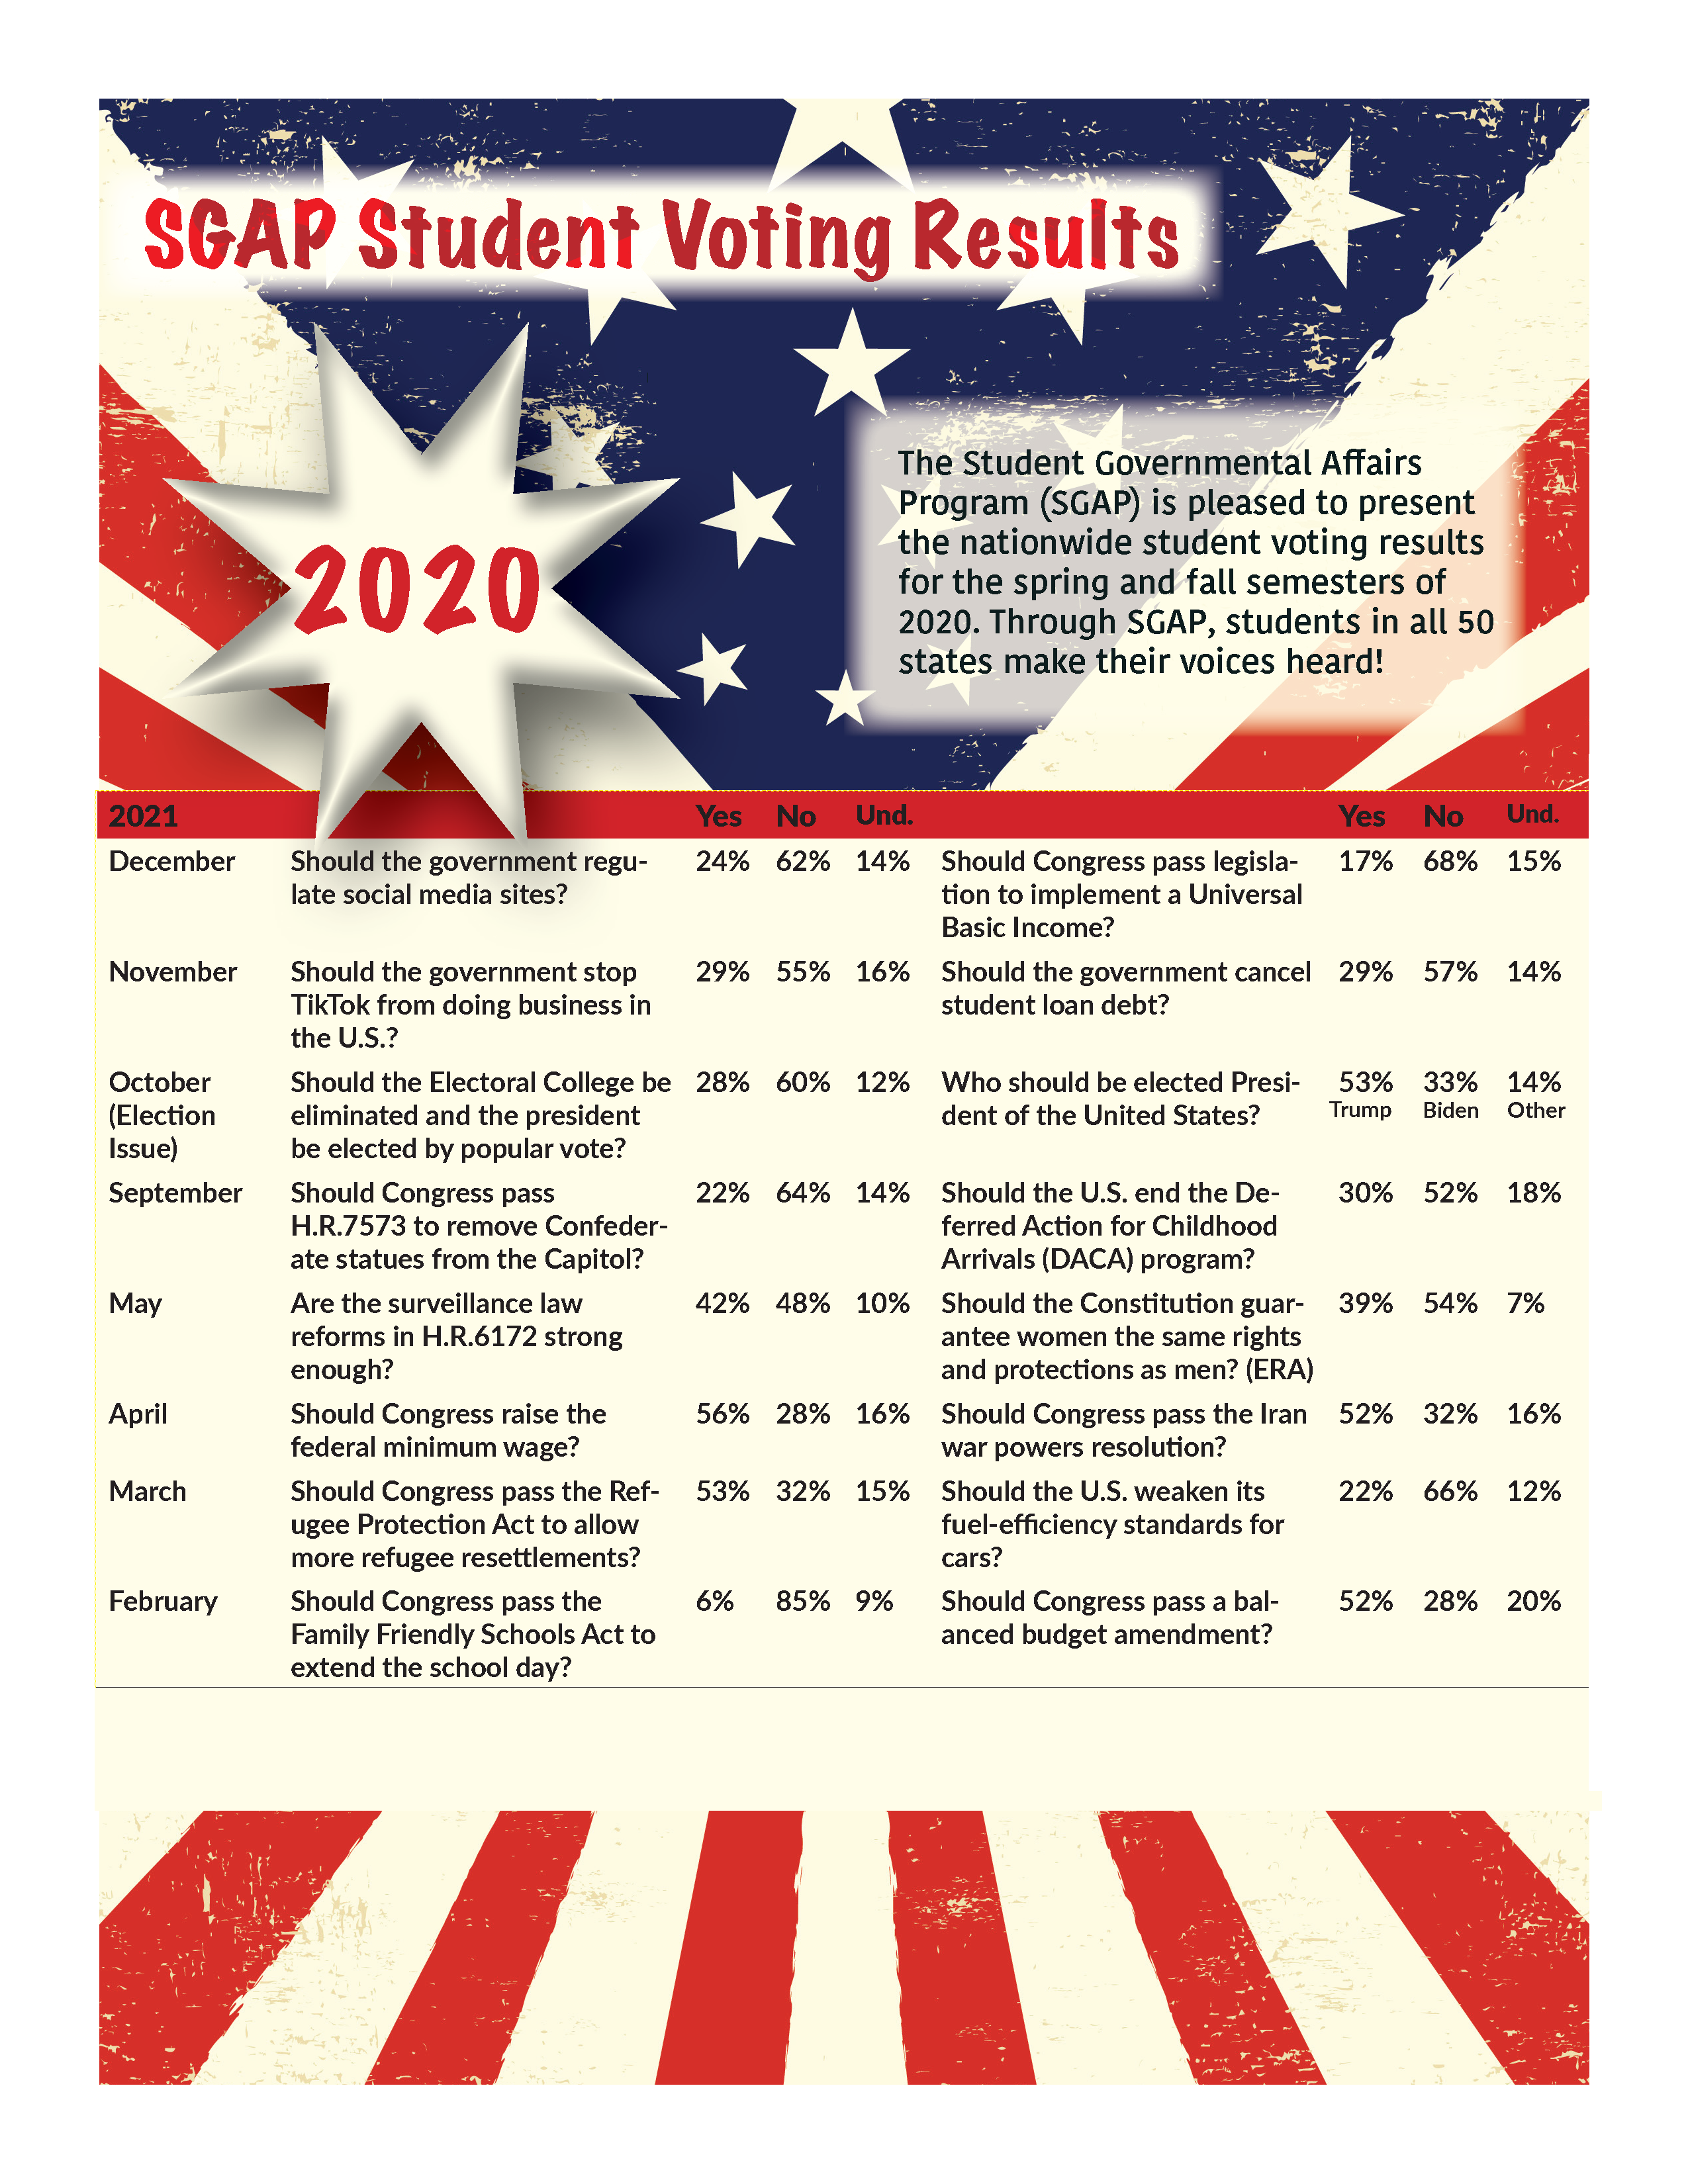 This image shows the nationwide student voting results from the SGAP student program for the 2021 topics.